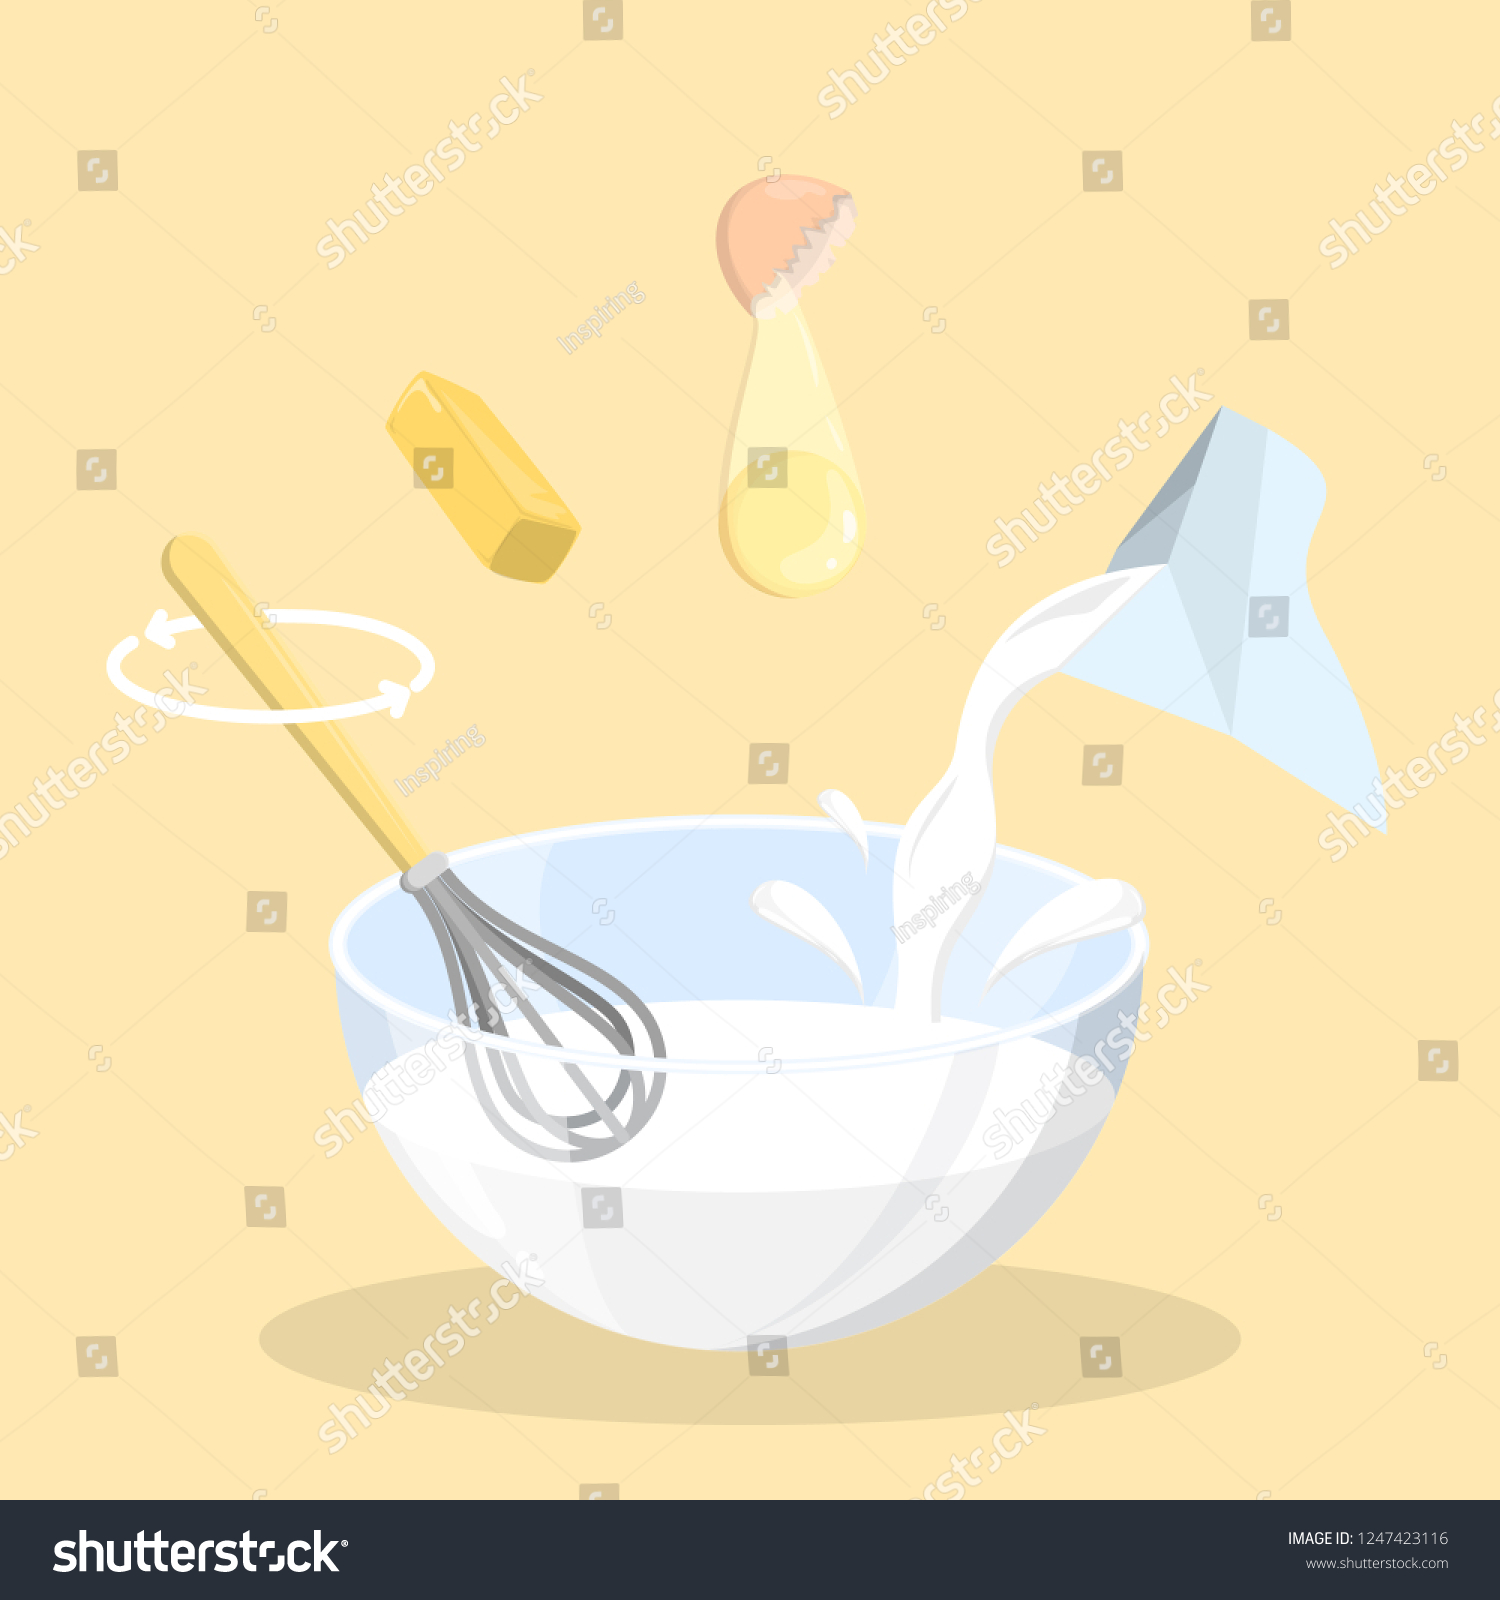 SVG of Baking ingredients for pancake in a bowl. Mixing milk, egg and butter for batter. Homemade food. Isolated vector illustration svg